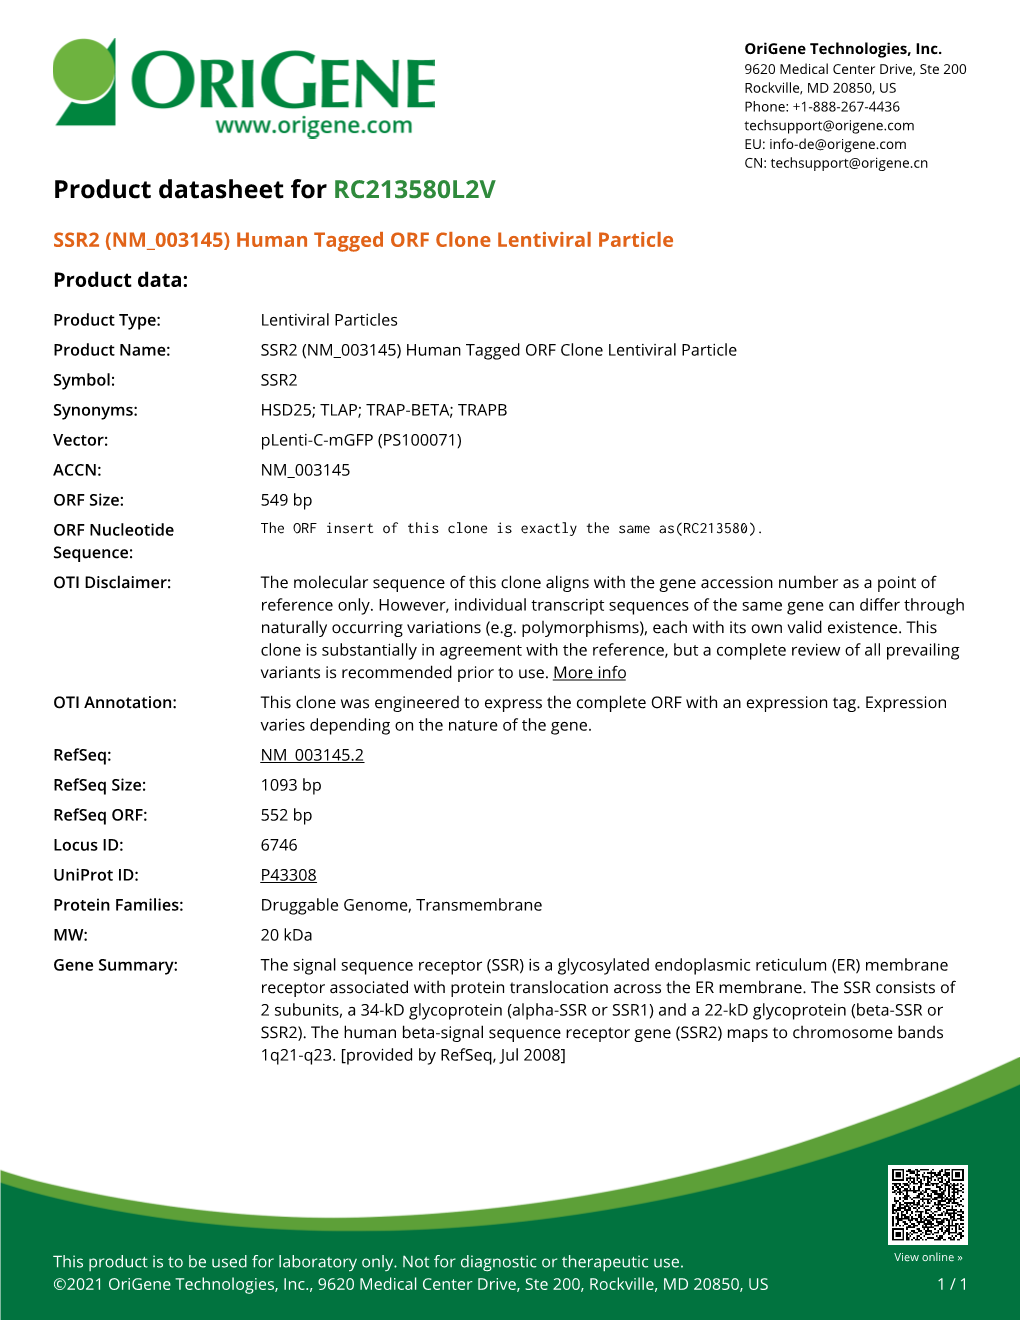 SSR2 (NM 003145) Human Tagged ORF Clone Lentiviral Particle Product Data